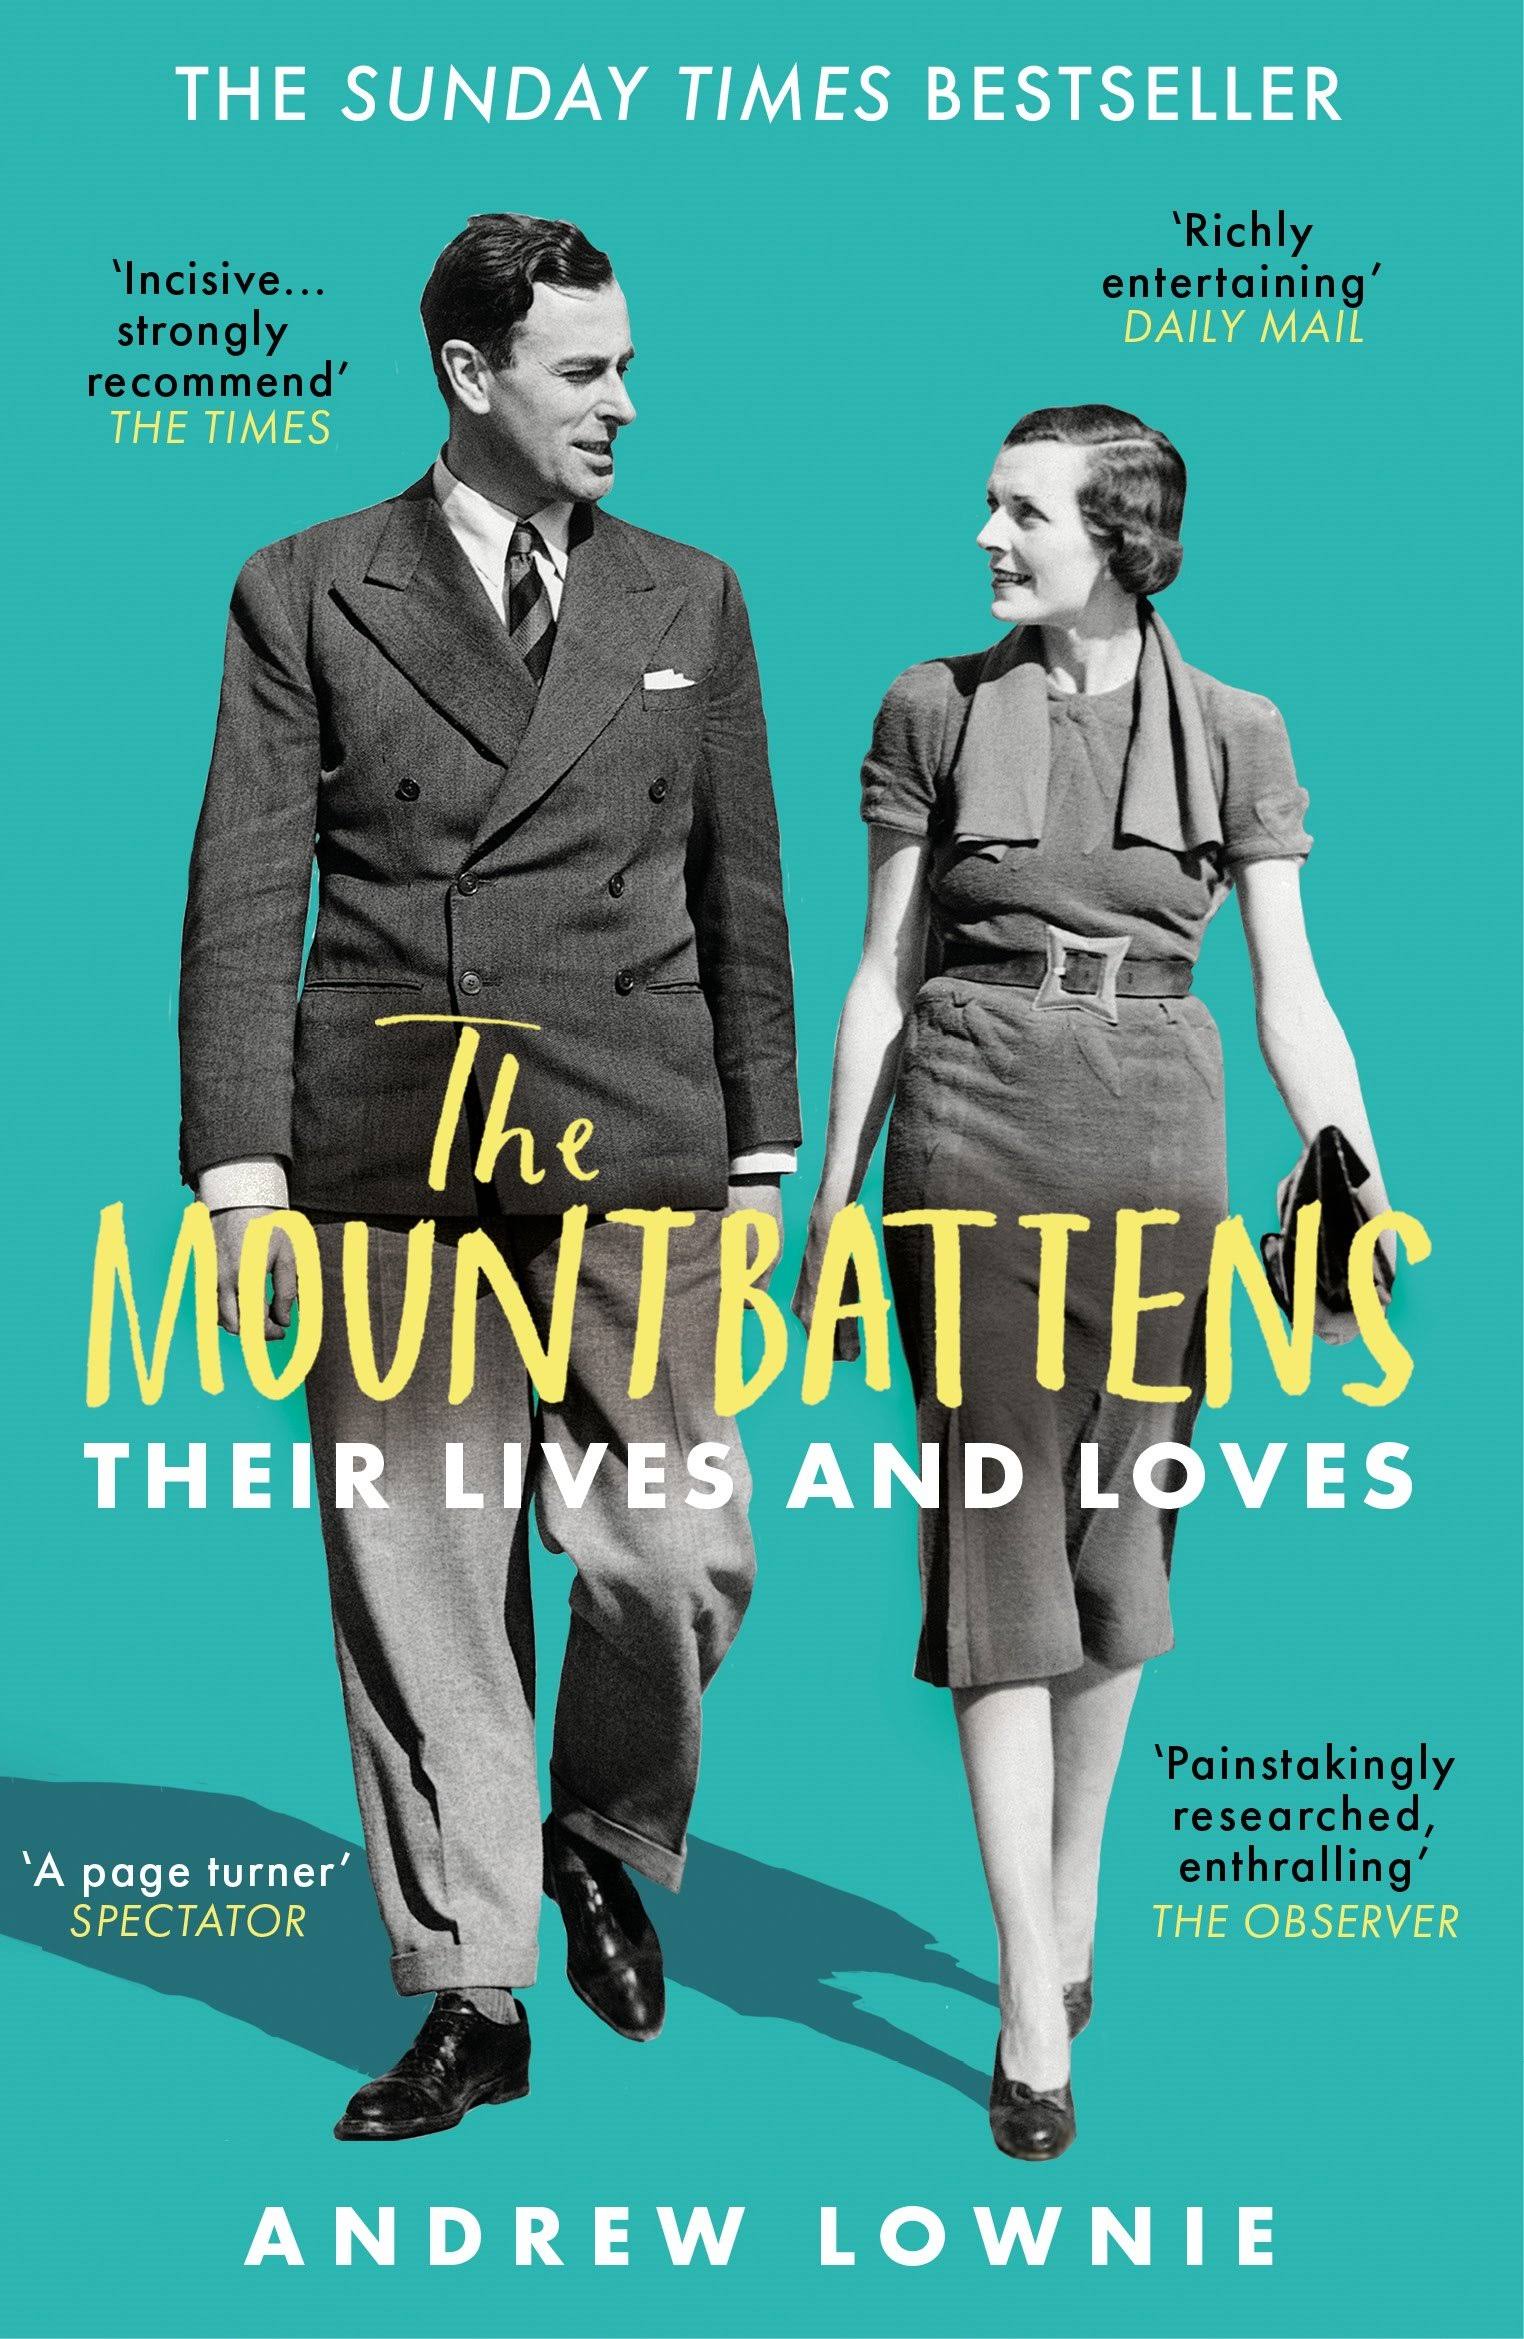 The Mountbattens - Their Lives & Loves: The Sunday Times Bestseller